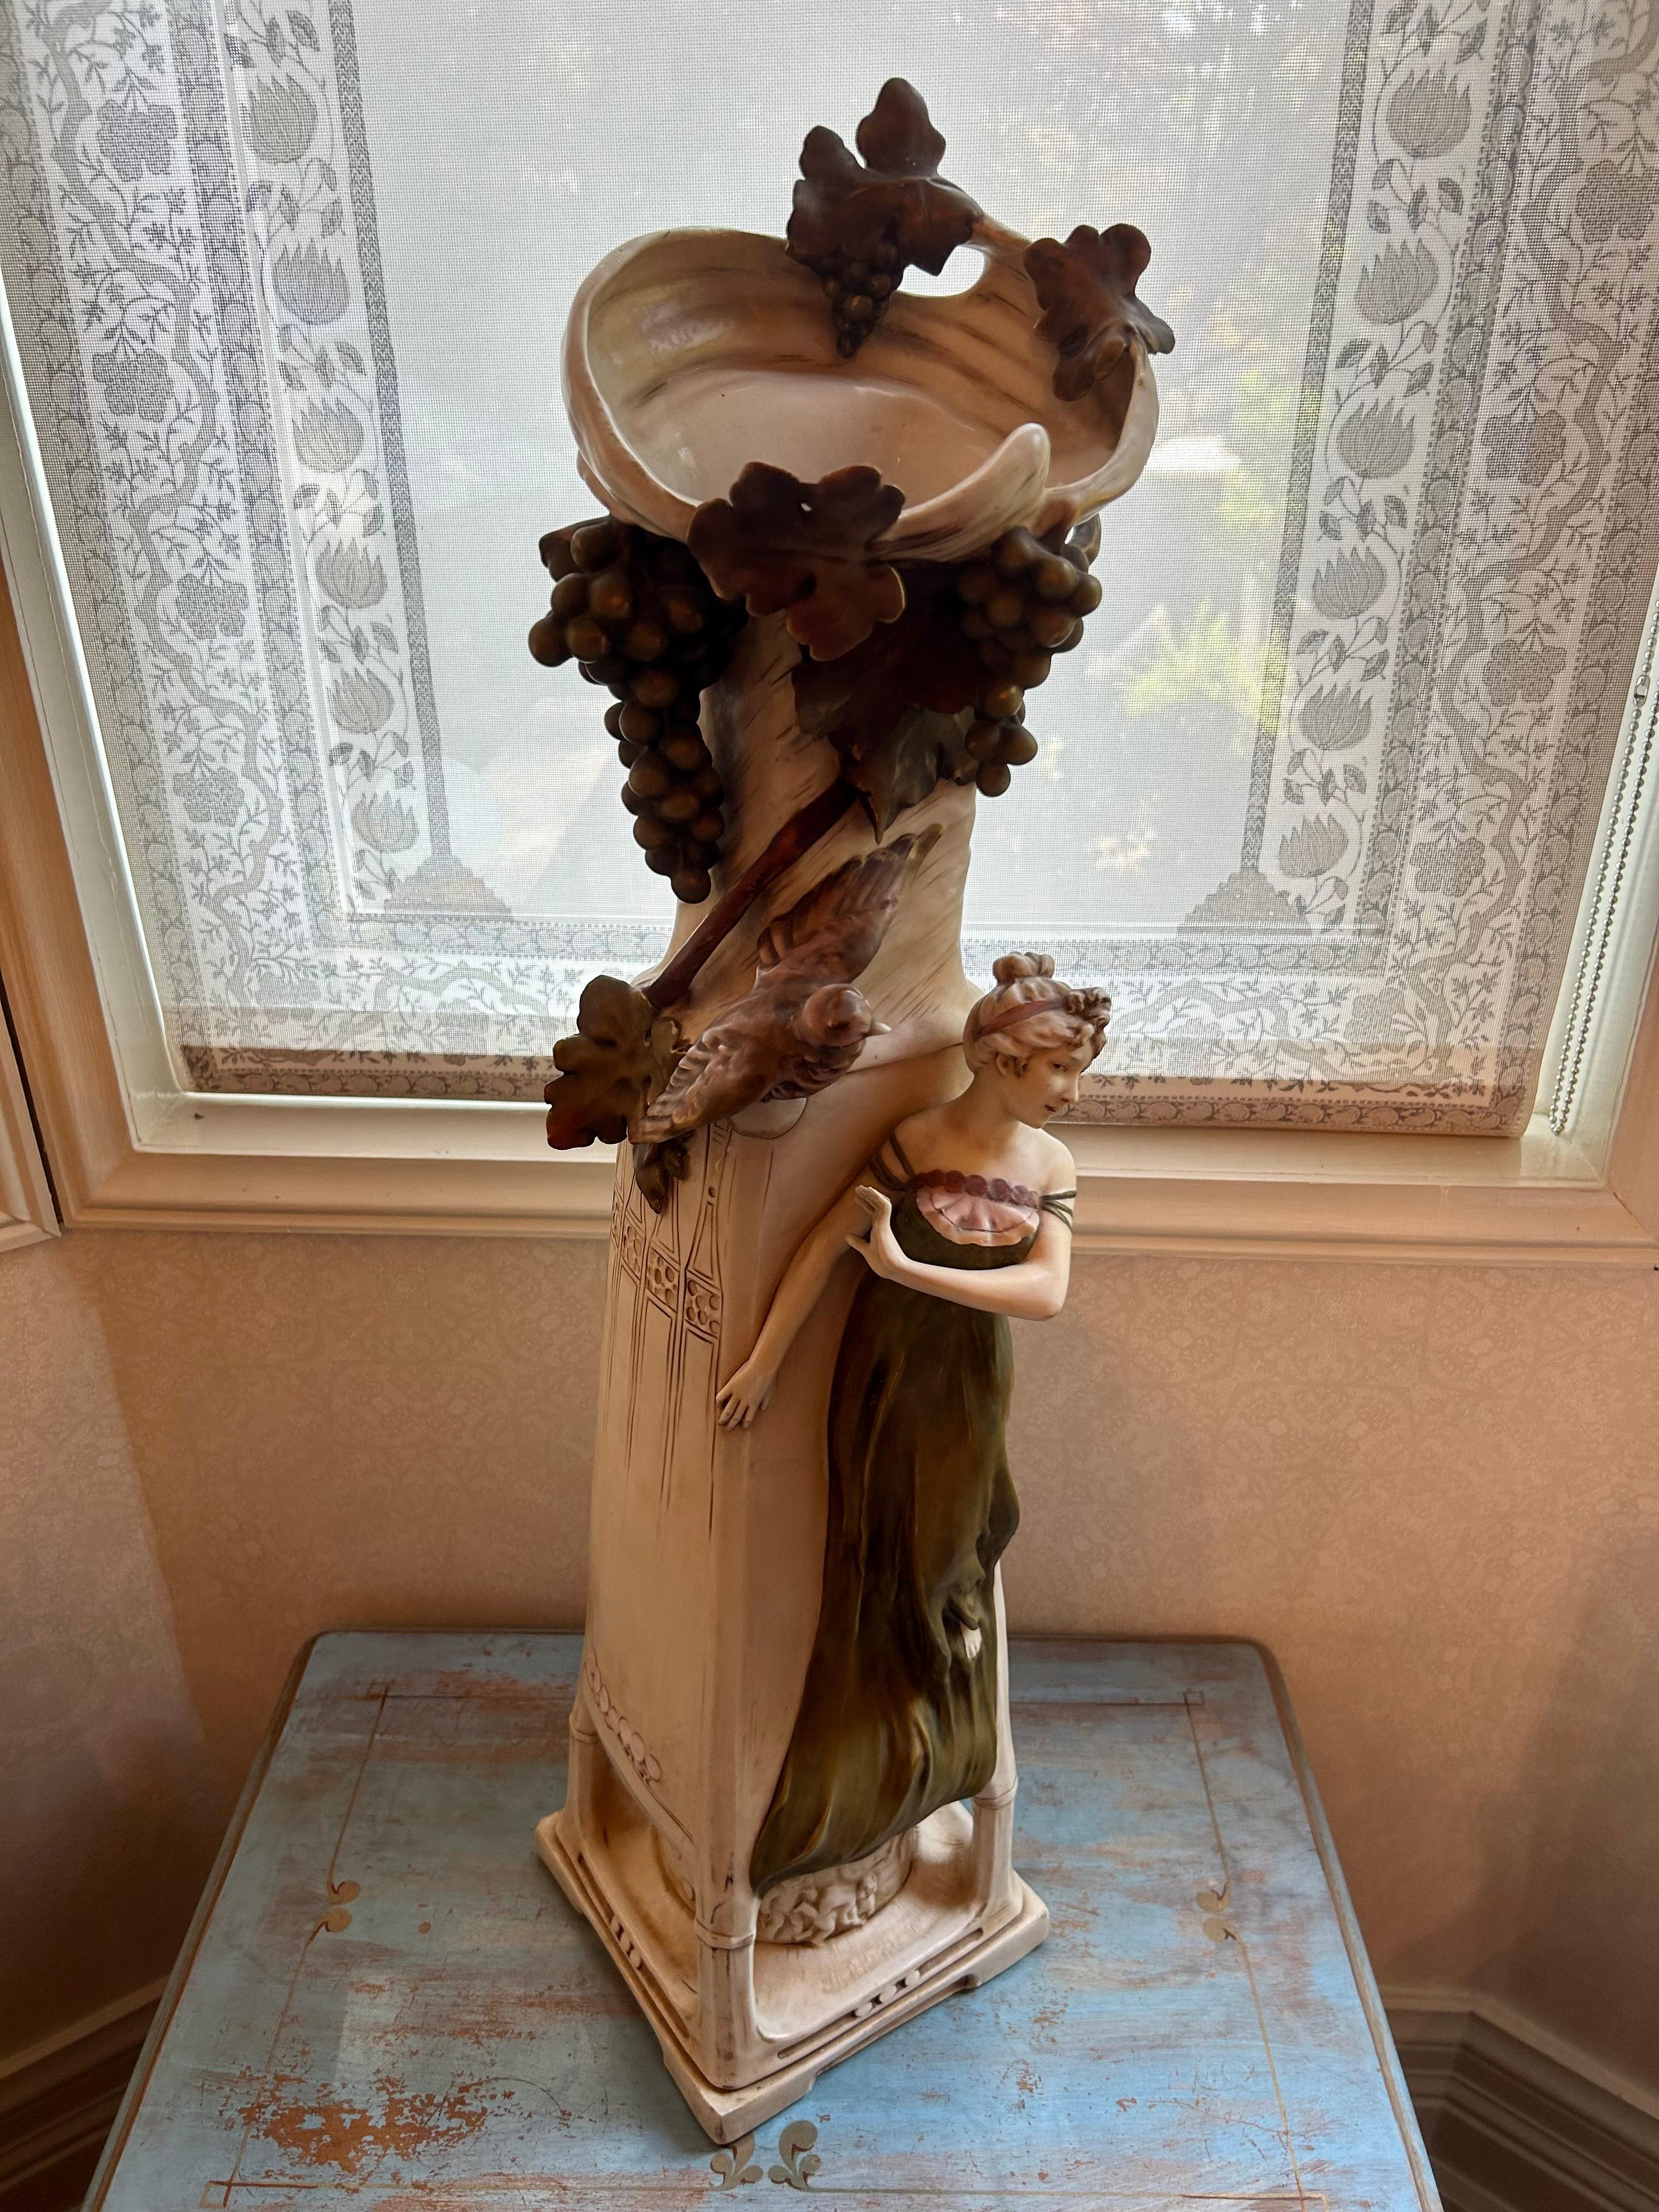 A monumental Royal Dux Bohemia porcelain vase, featuring a beautiful maiden standing under a grapevine, with a large bird. The base of the vase featuring frolicking putti. Typical Art Nouveau motifs throughout, stylized incised lines and pale pink